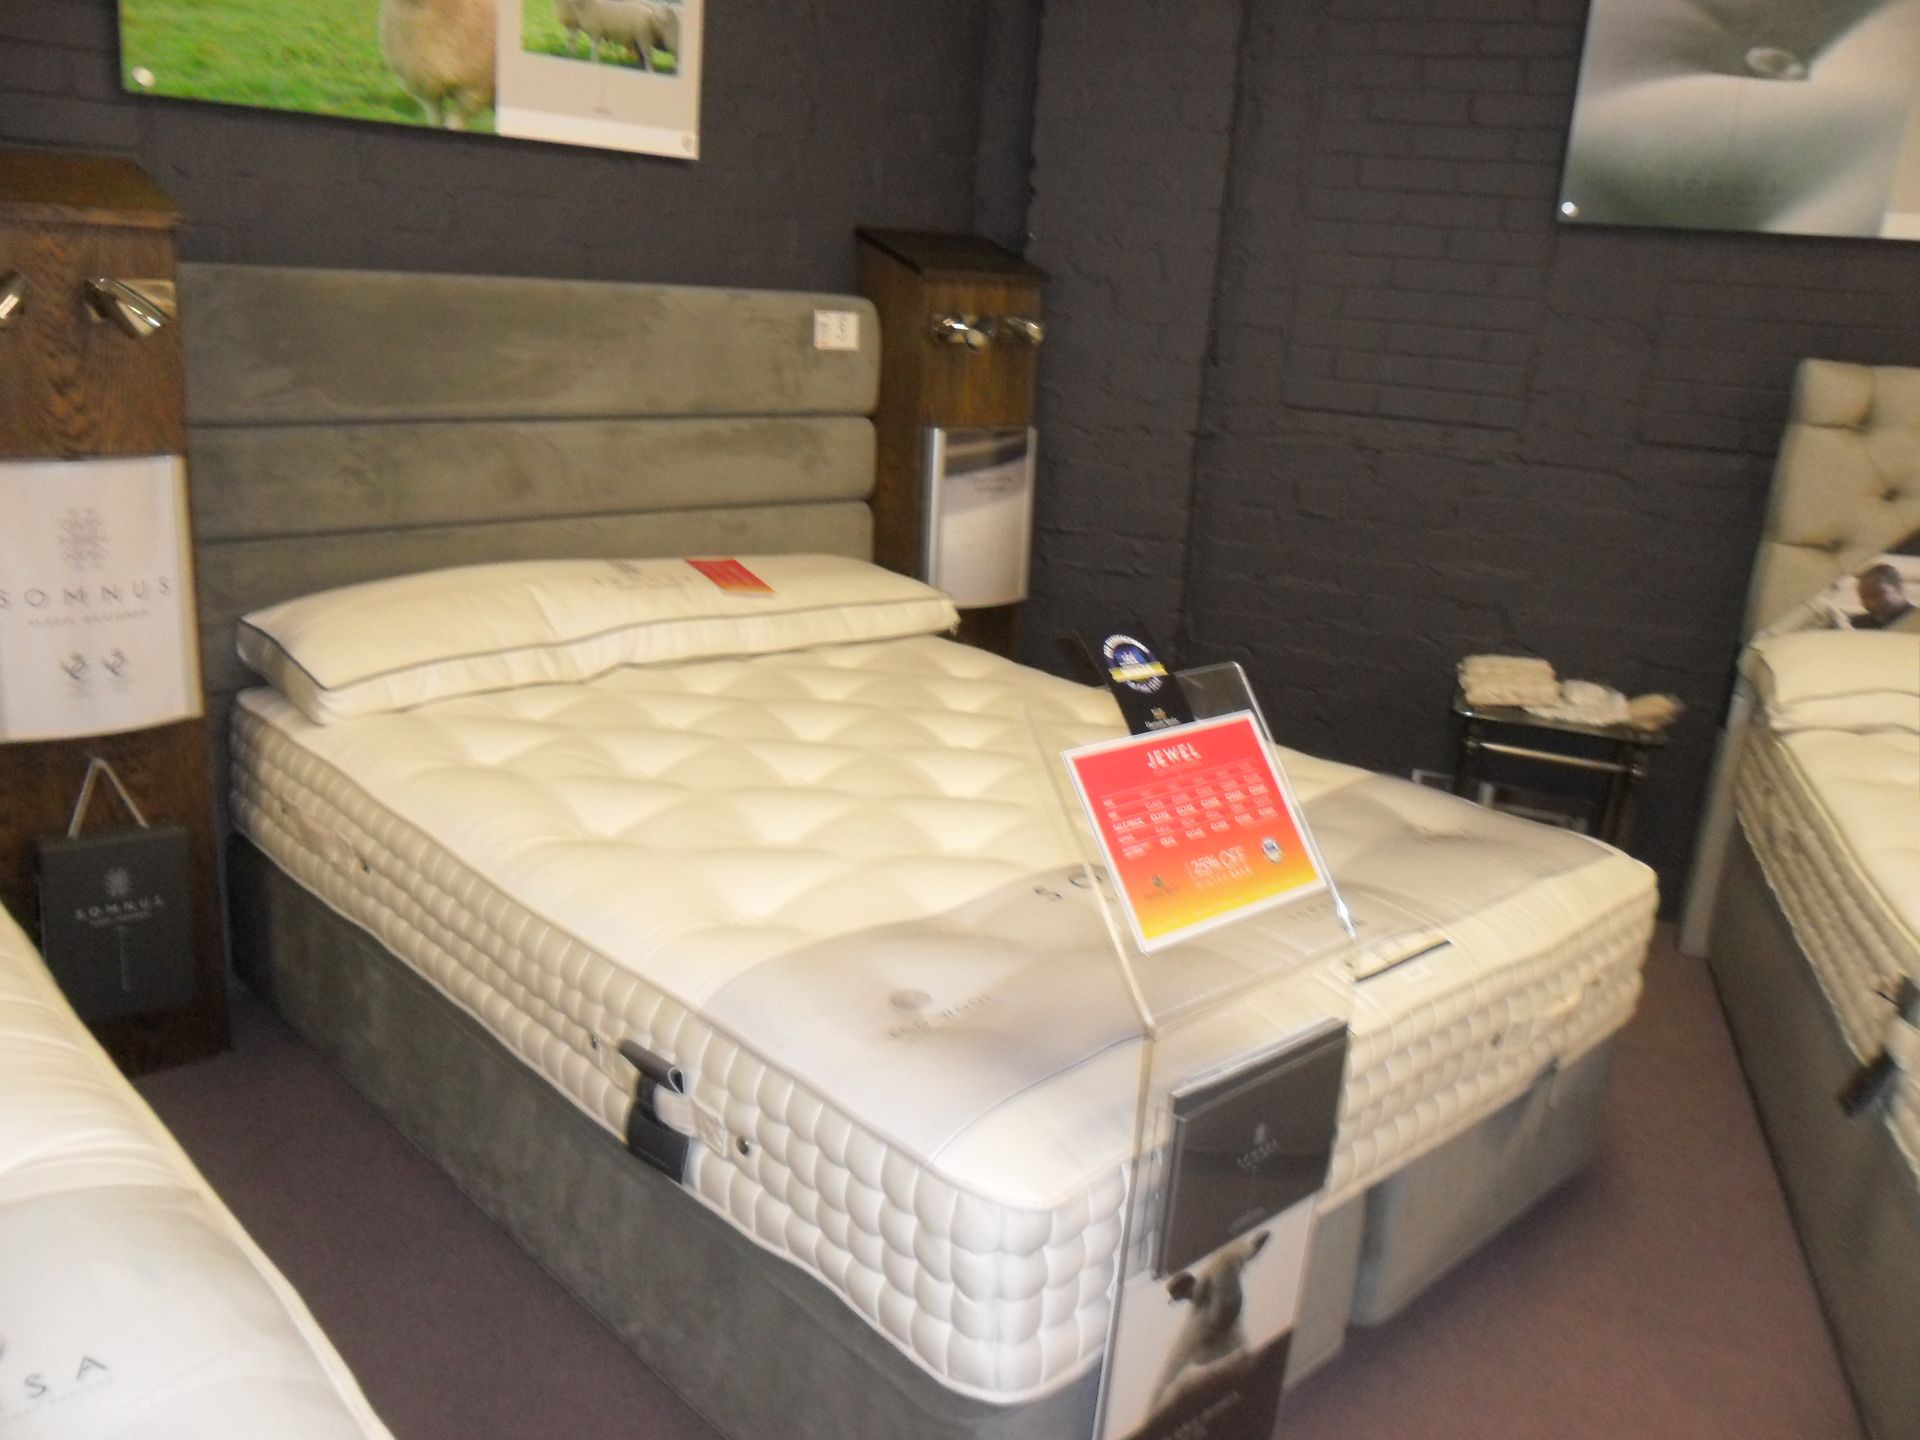 Harrison Sprinks Somnus Jewell 9000 sleep system king size bed and mattress RRP £3549, Ashford Conti - Image 2 of 2